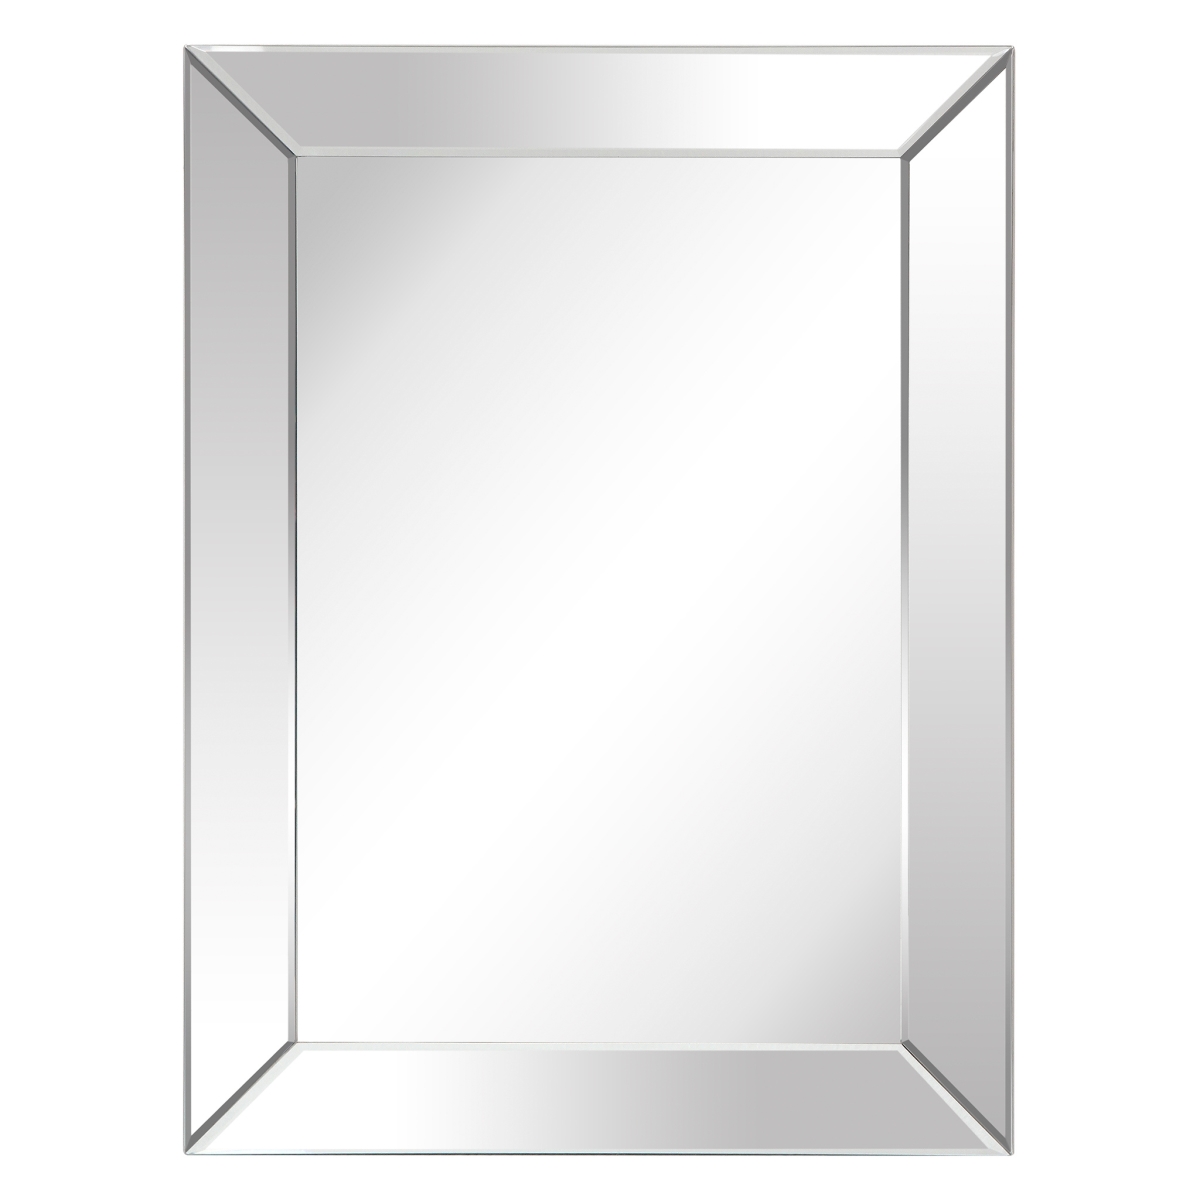 Empire Art Direct MOM-10690-4030 Moderno Beveled Wall Mirrorsolid Wood Frame Covered with Beveled Clear Mirror Panels - 1 in. Beveled Center Mirro